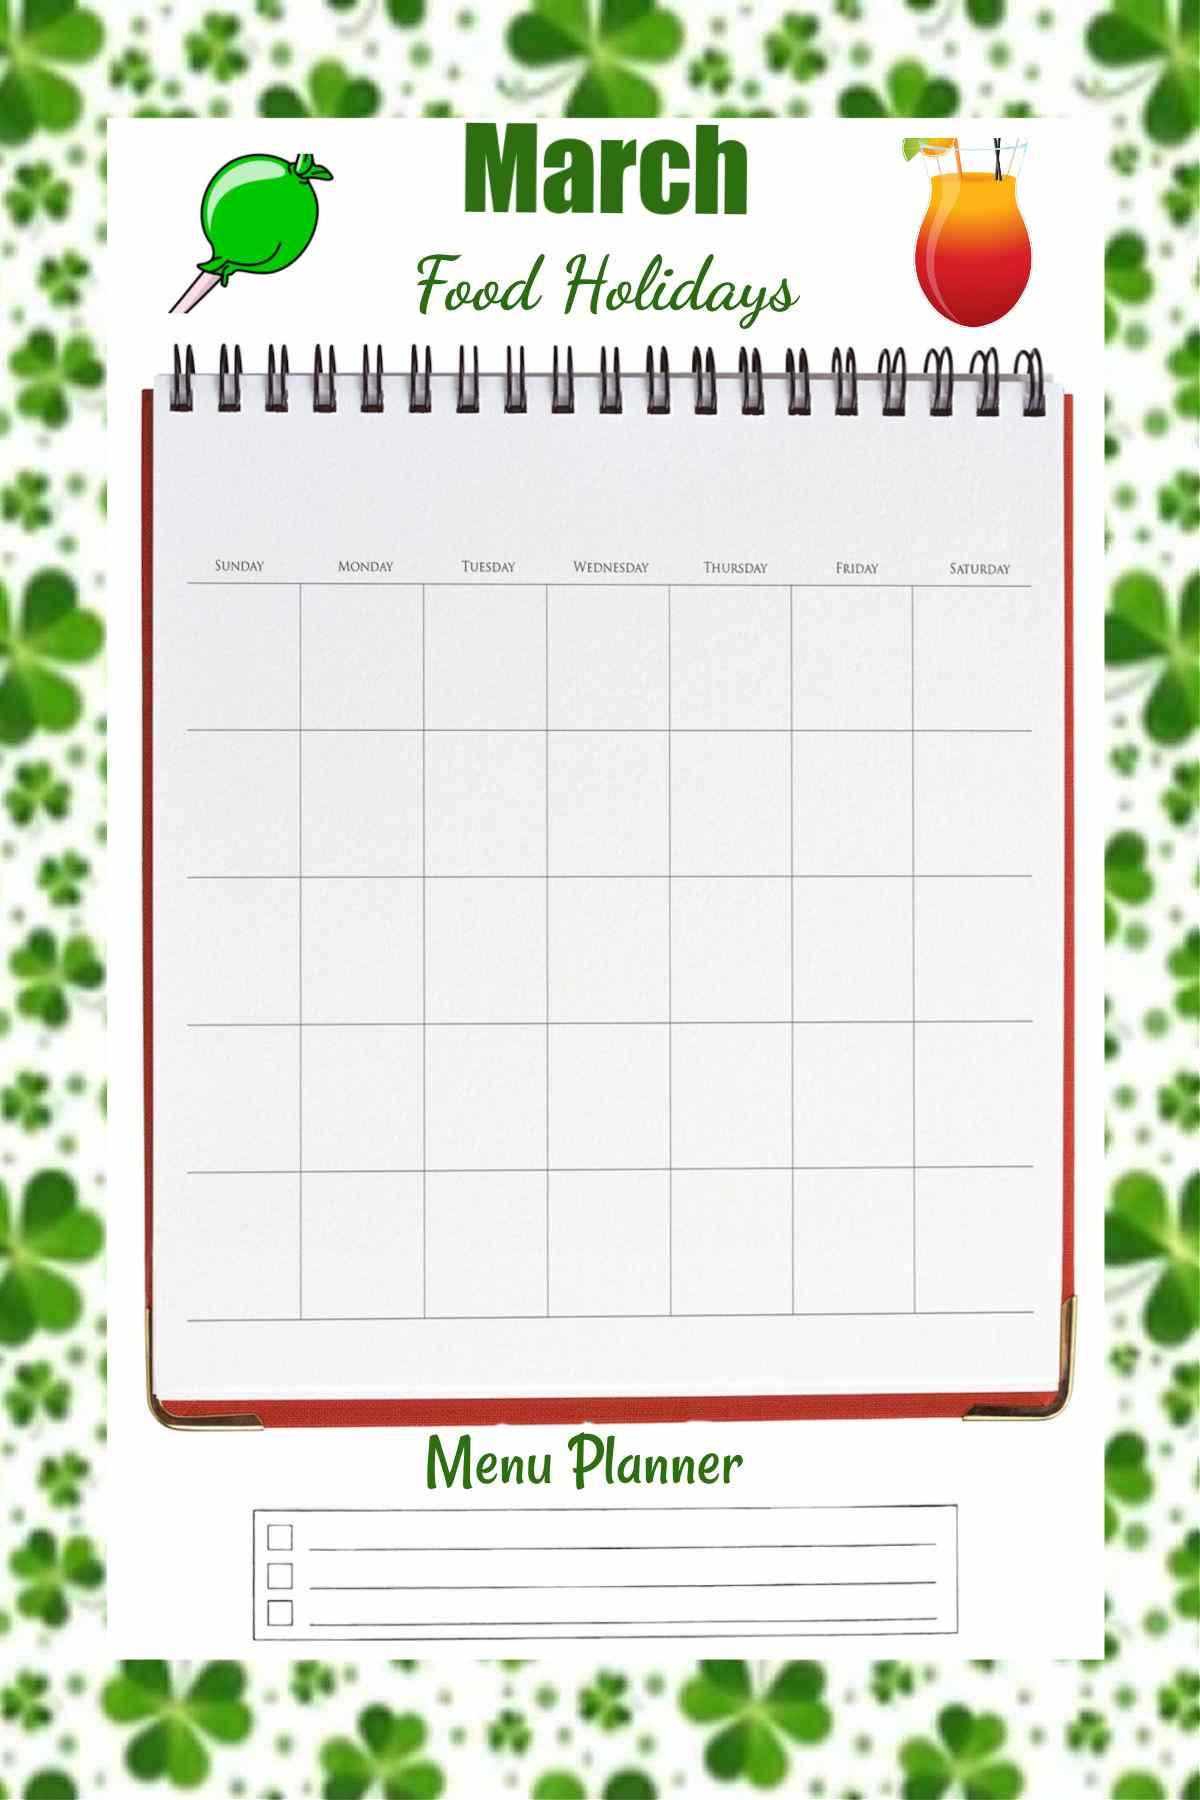 Shamrock background with a March food holidays planner.